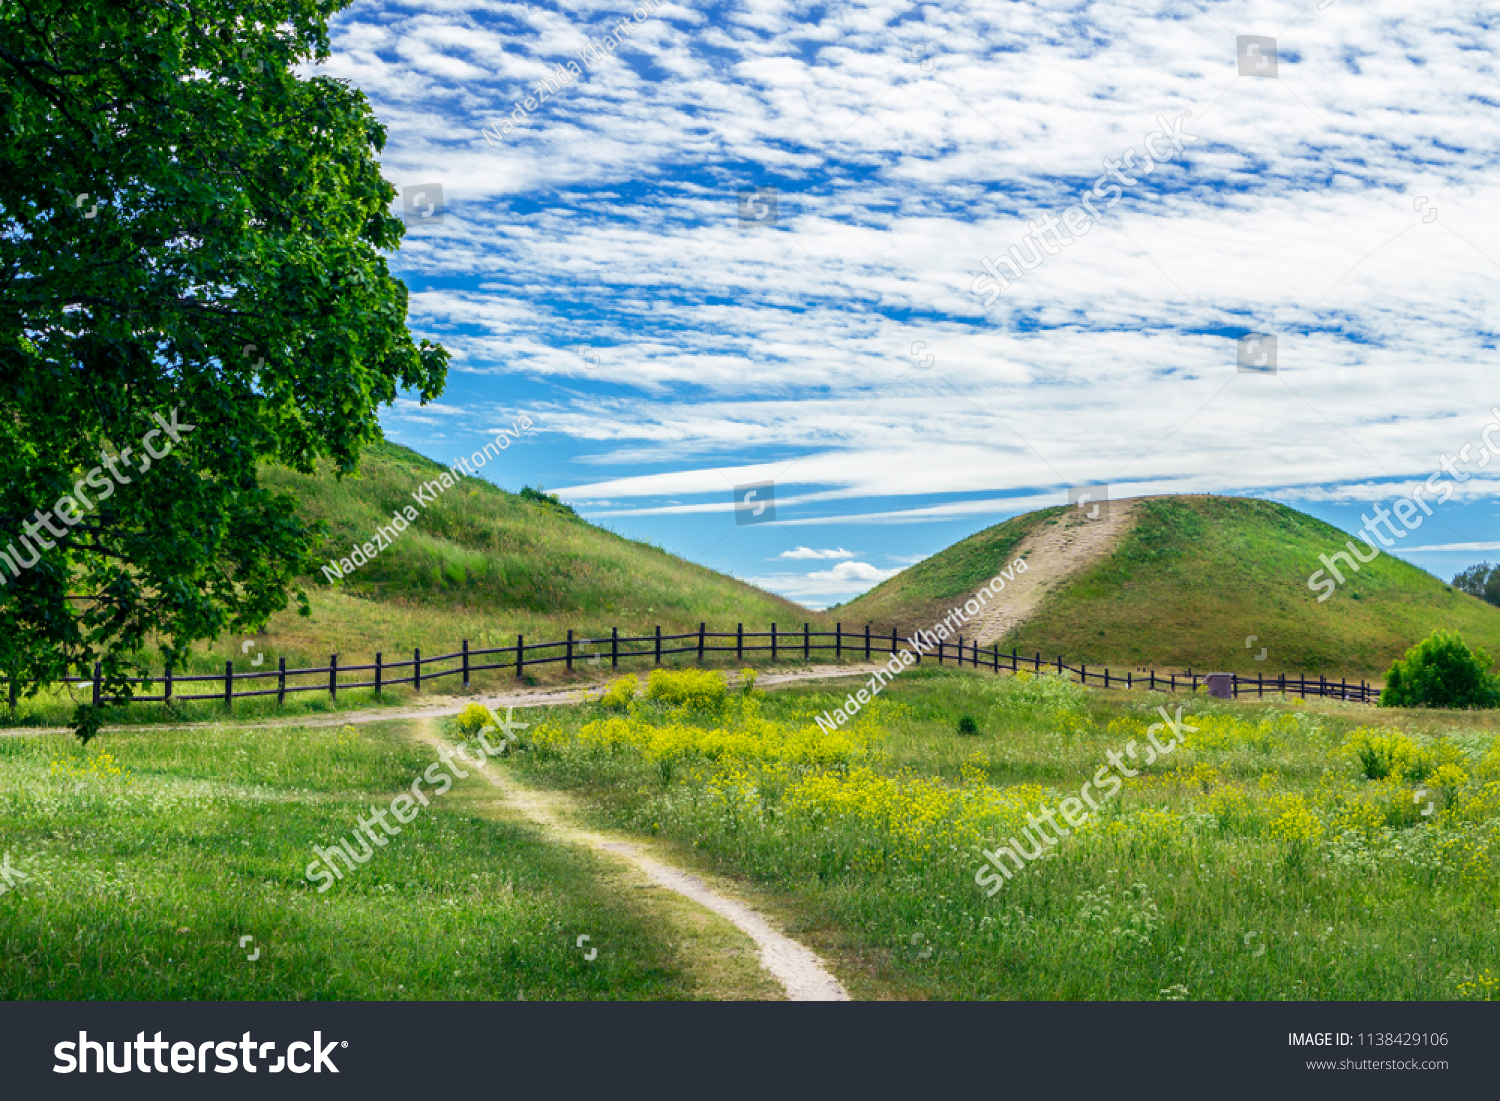 Royal Mounds - large barrows located in Gamla Uppsala village, Uppland, Sweden (70 km from Stockholm).  Beautiful Viking graves covered by grass. Gamla Uppsala is area rich in archaeological remains. #1138429106